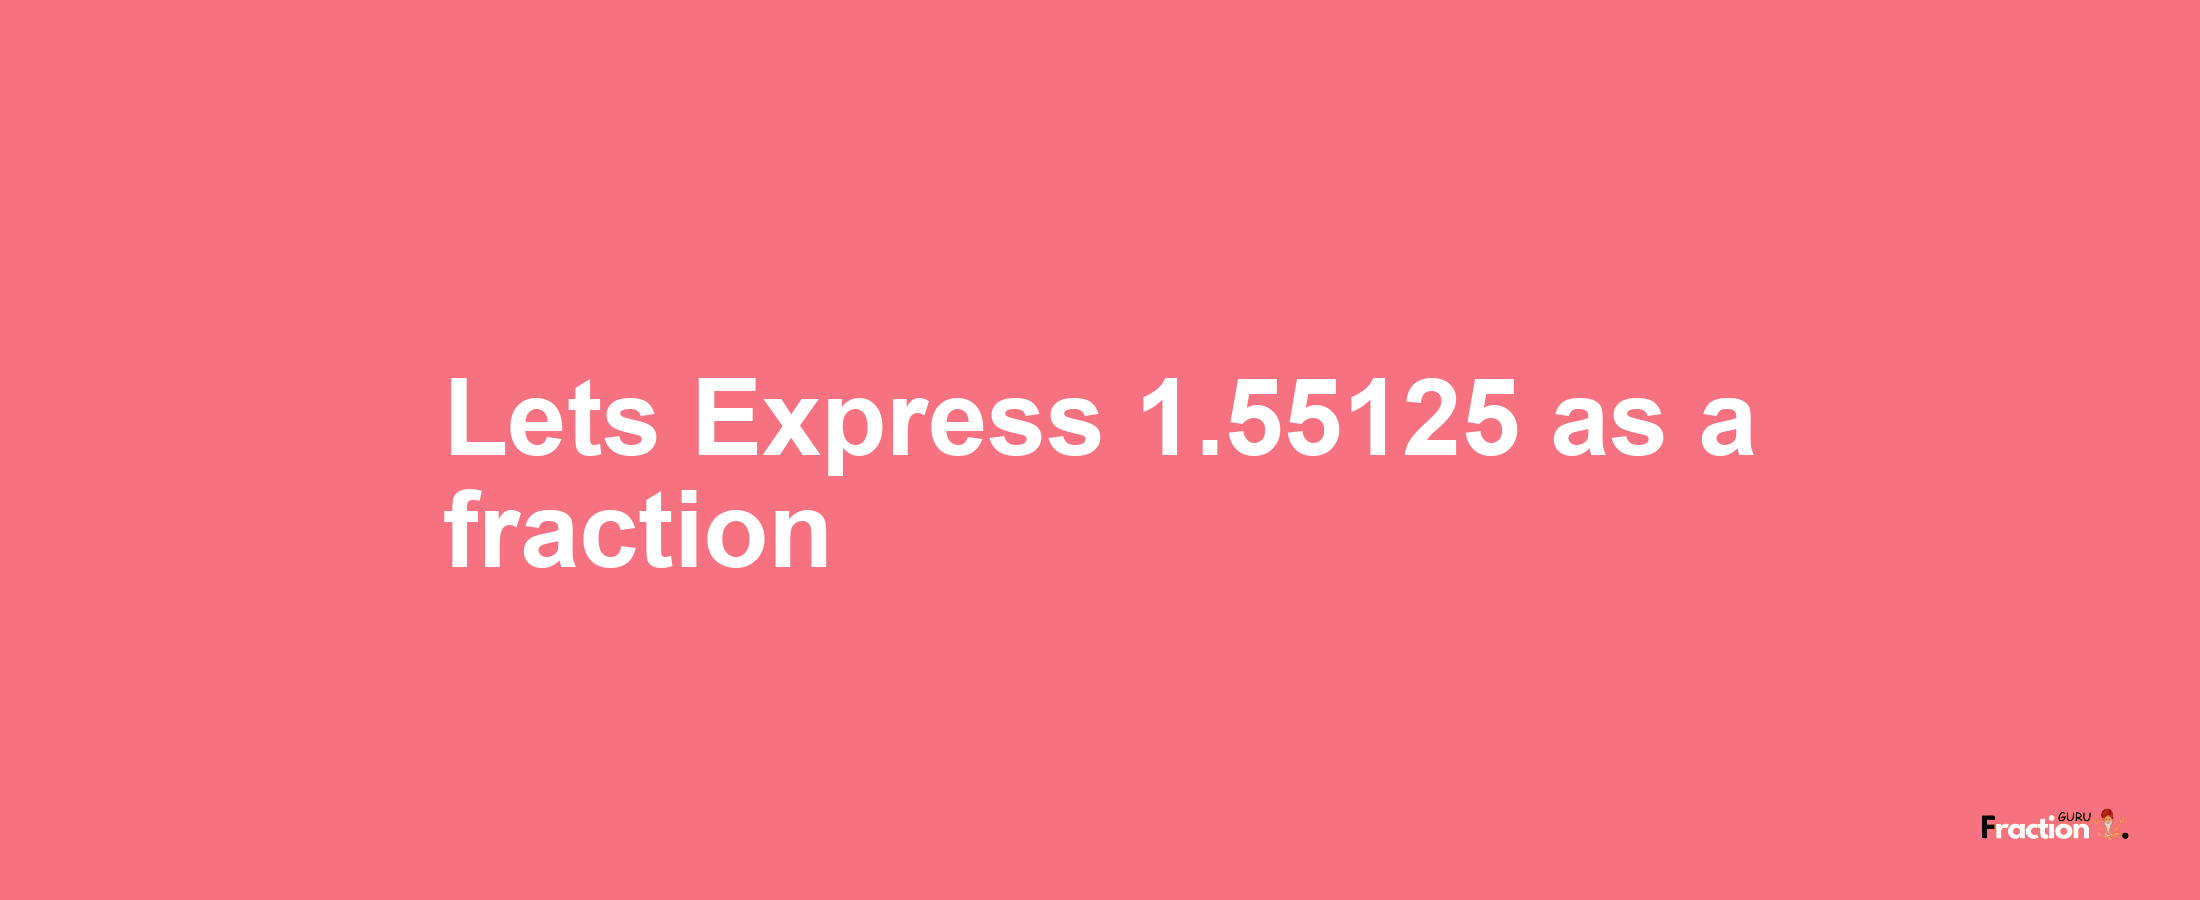 Lets Express 1.55125 as afraction